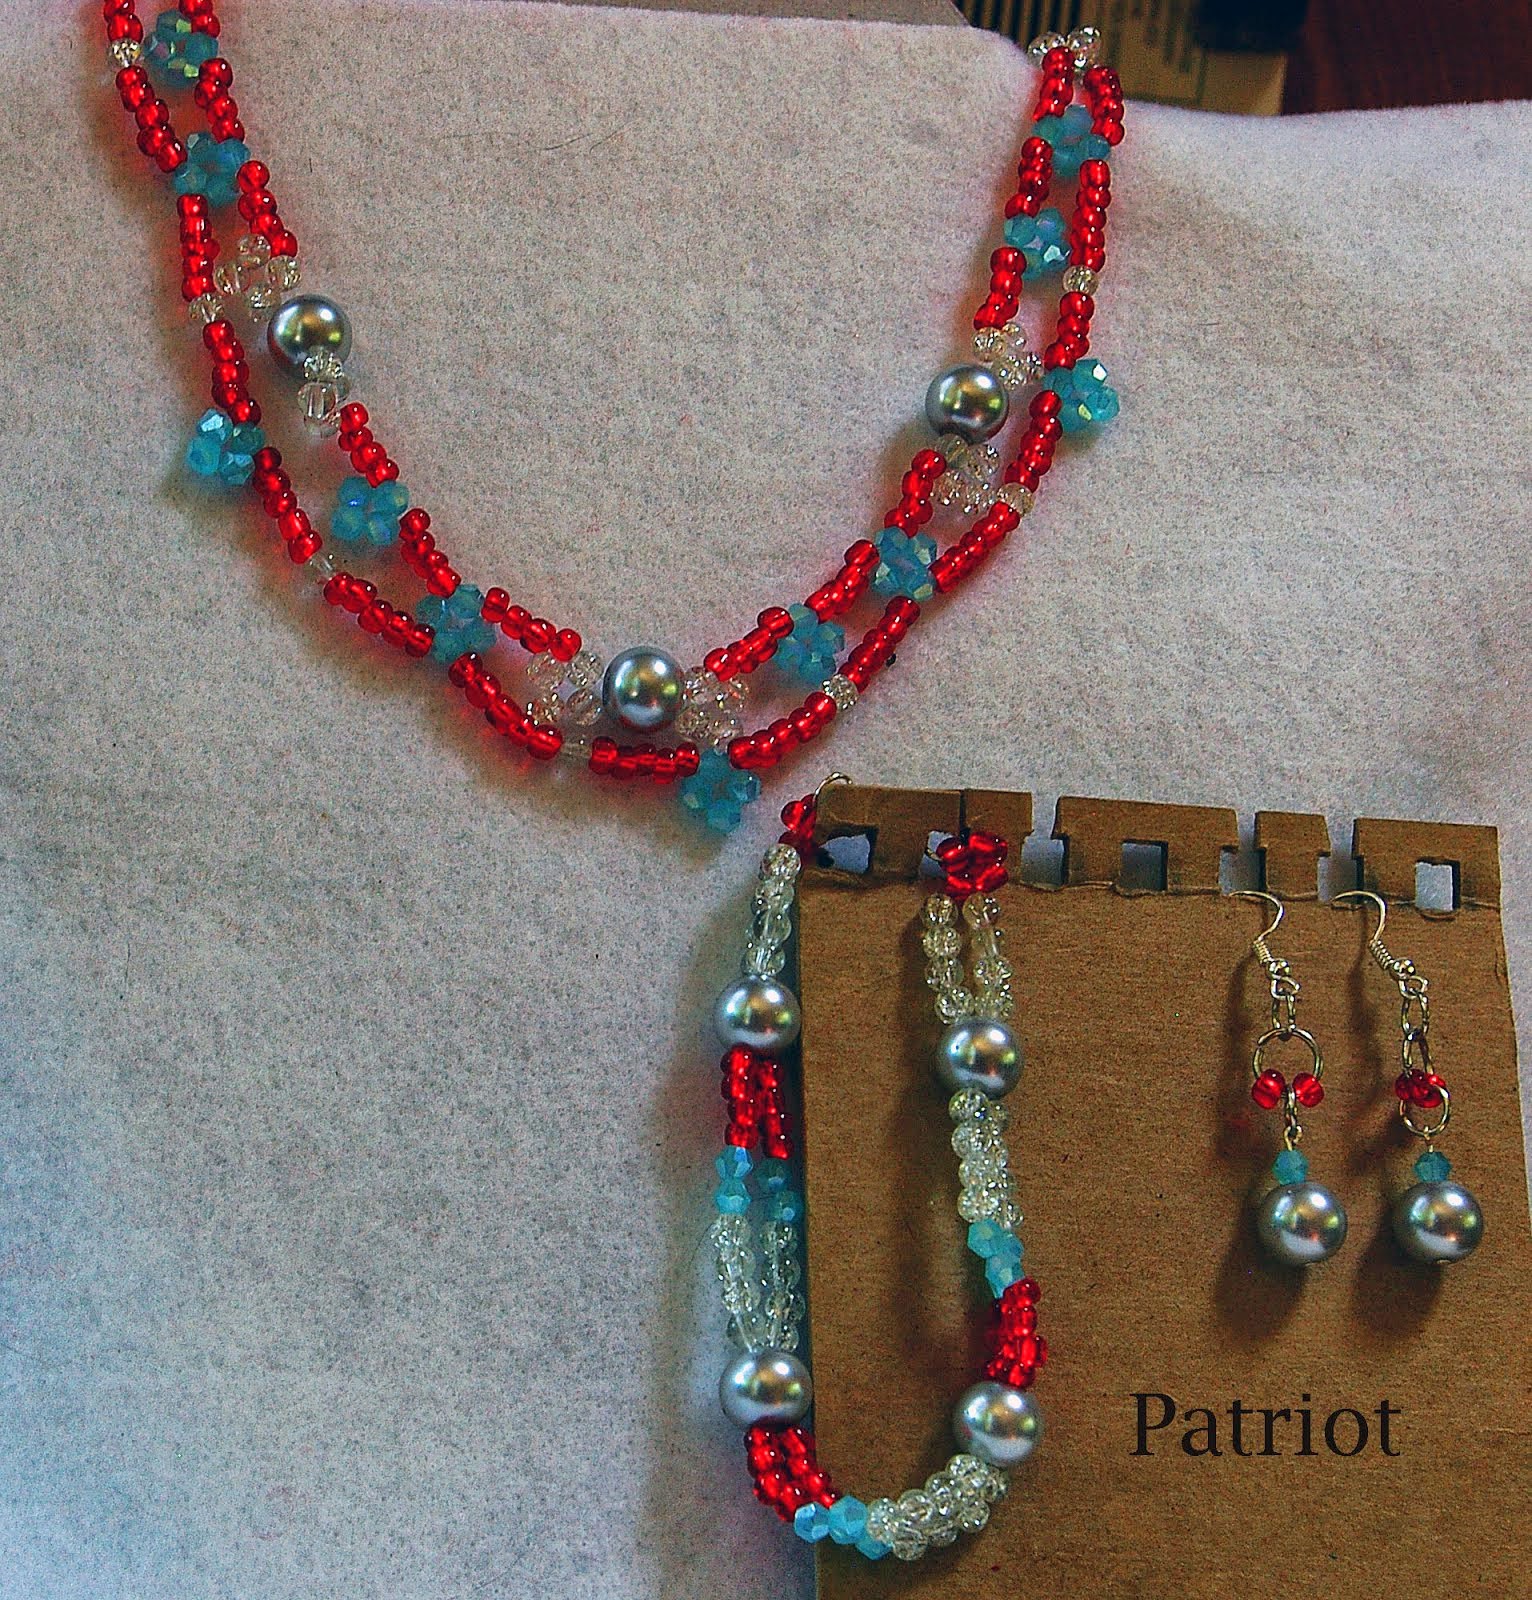 Patriot necklace, earrings, and bracelet